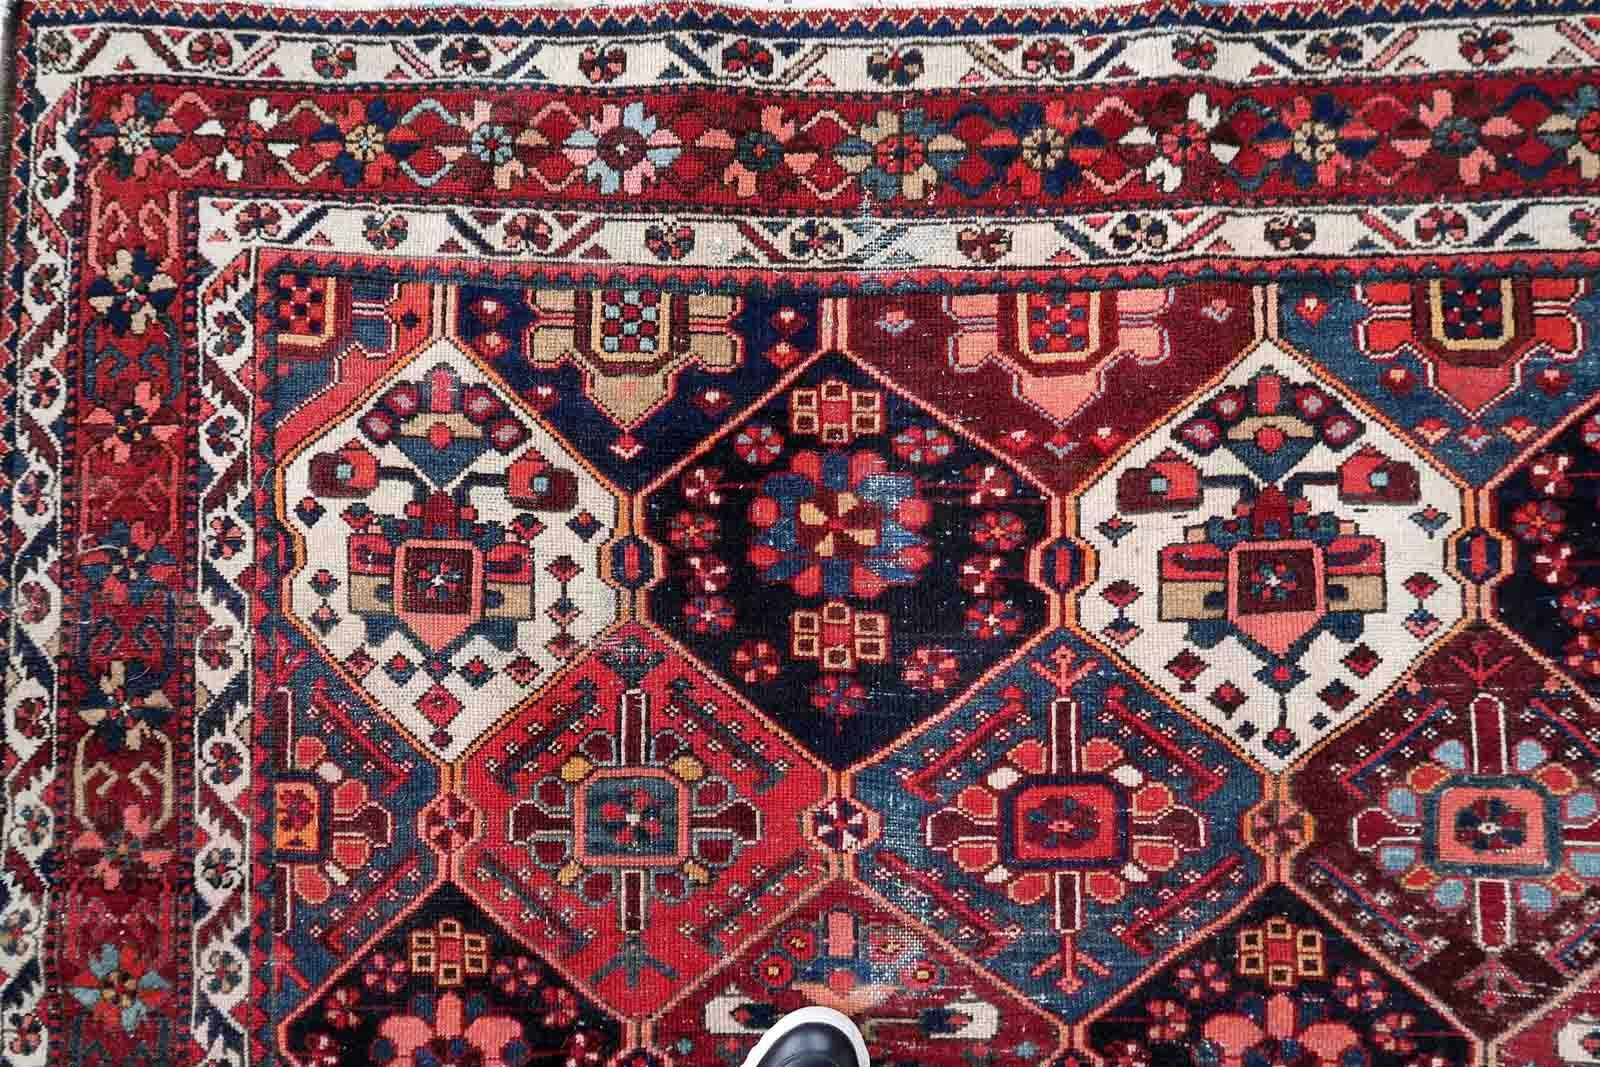 Handmade antique Bakhtiari rug in traditional garden design with diamonds. The rug is from the beginning of 20th century in original condition, it has some low pile.

-condition: original, some low pile,

-circa: 1930s,

-size: 7.3' x 9.8'